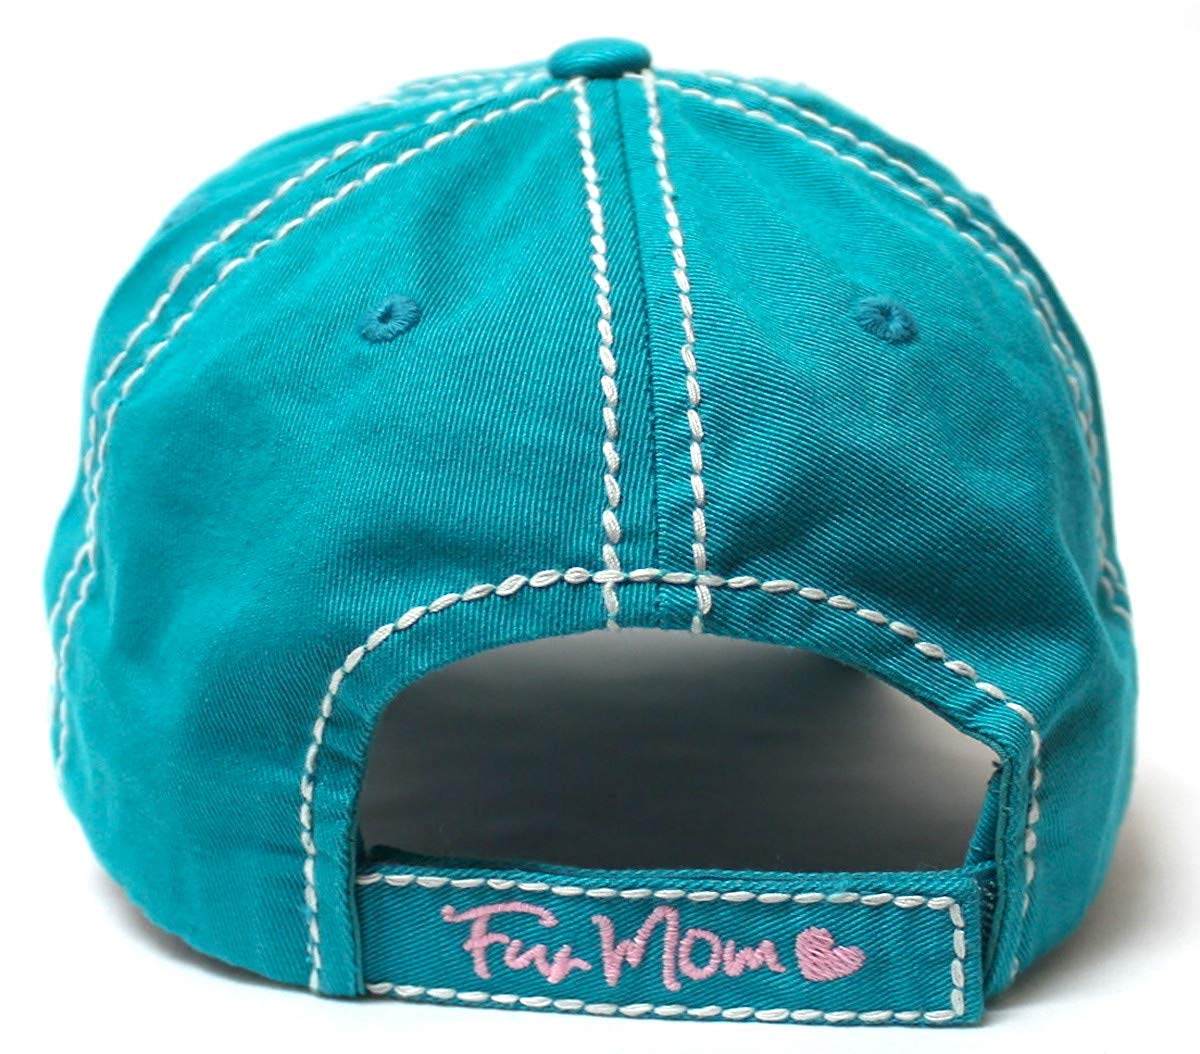 Women's Distressed Graphic Cap Fur Mom Fuzzy Dog Paw Embroidery, Turquoise - Caps 'N Vintage 